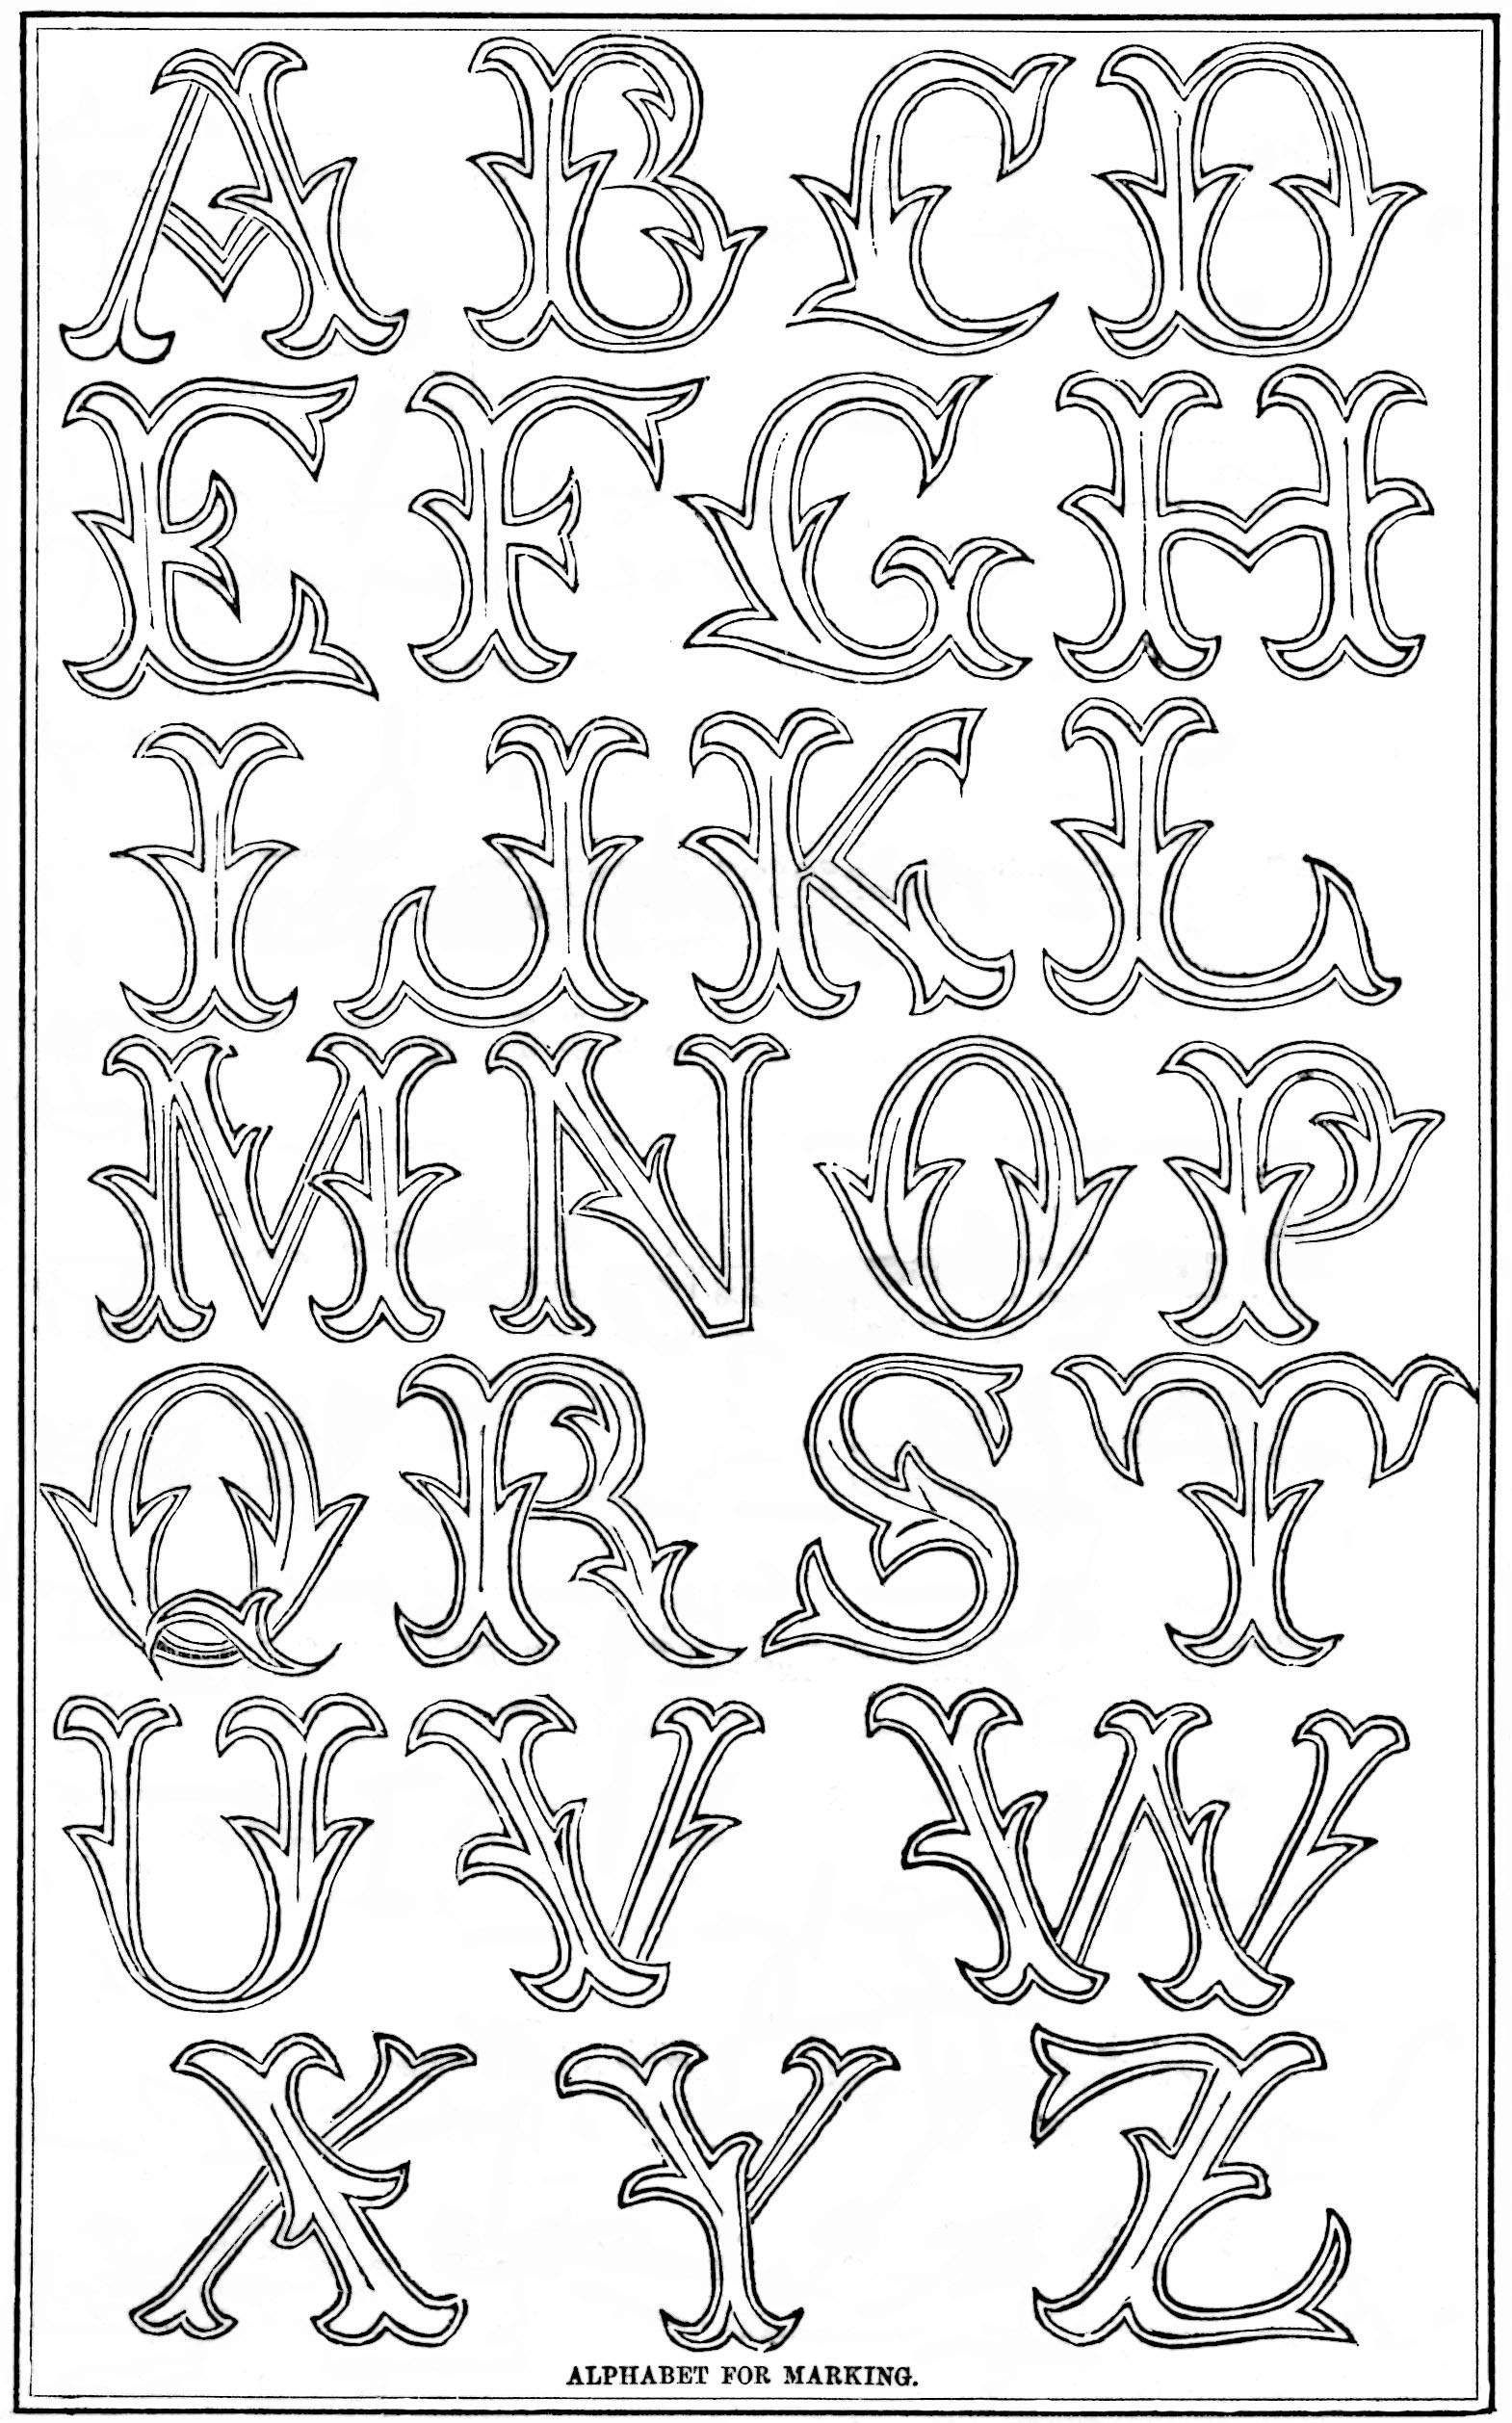 Embroidery Alphabet Patterns Free Fancy Antique Alphabet Patterns For Embroidery Monograms Vintage